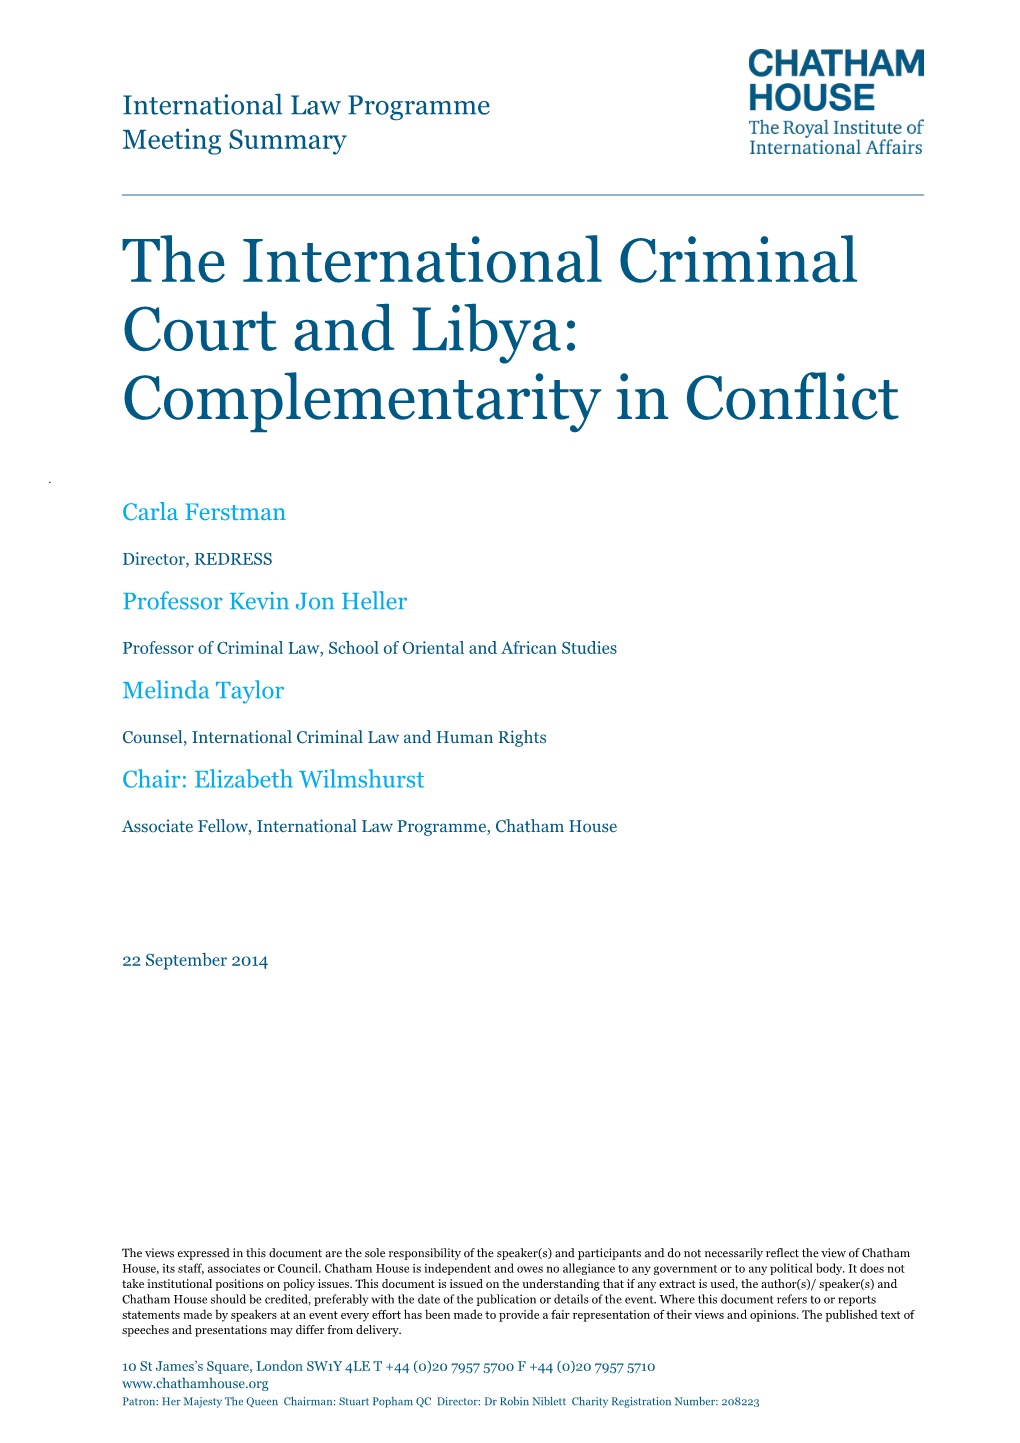 The International Criminal Court and Libya: Complementarity in Conflict